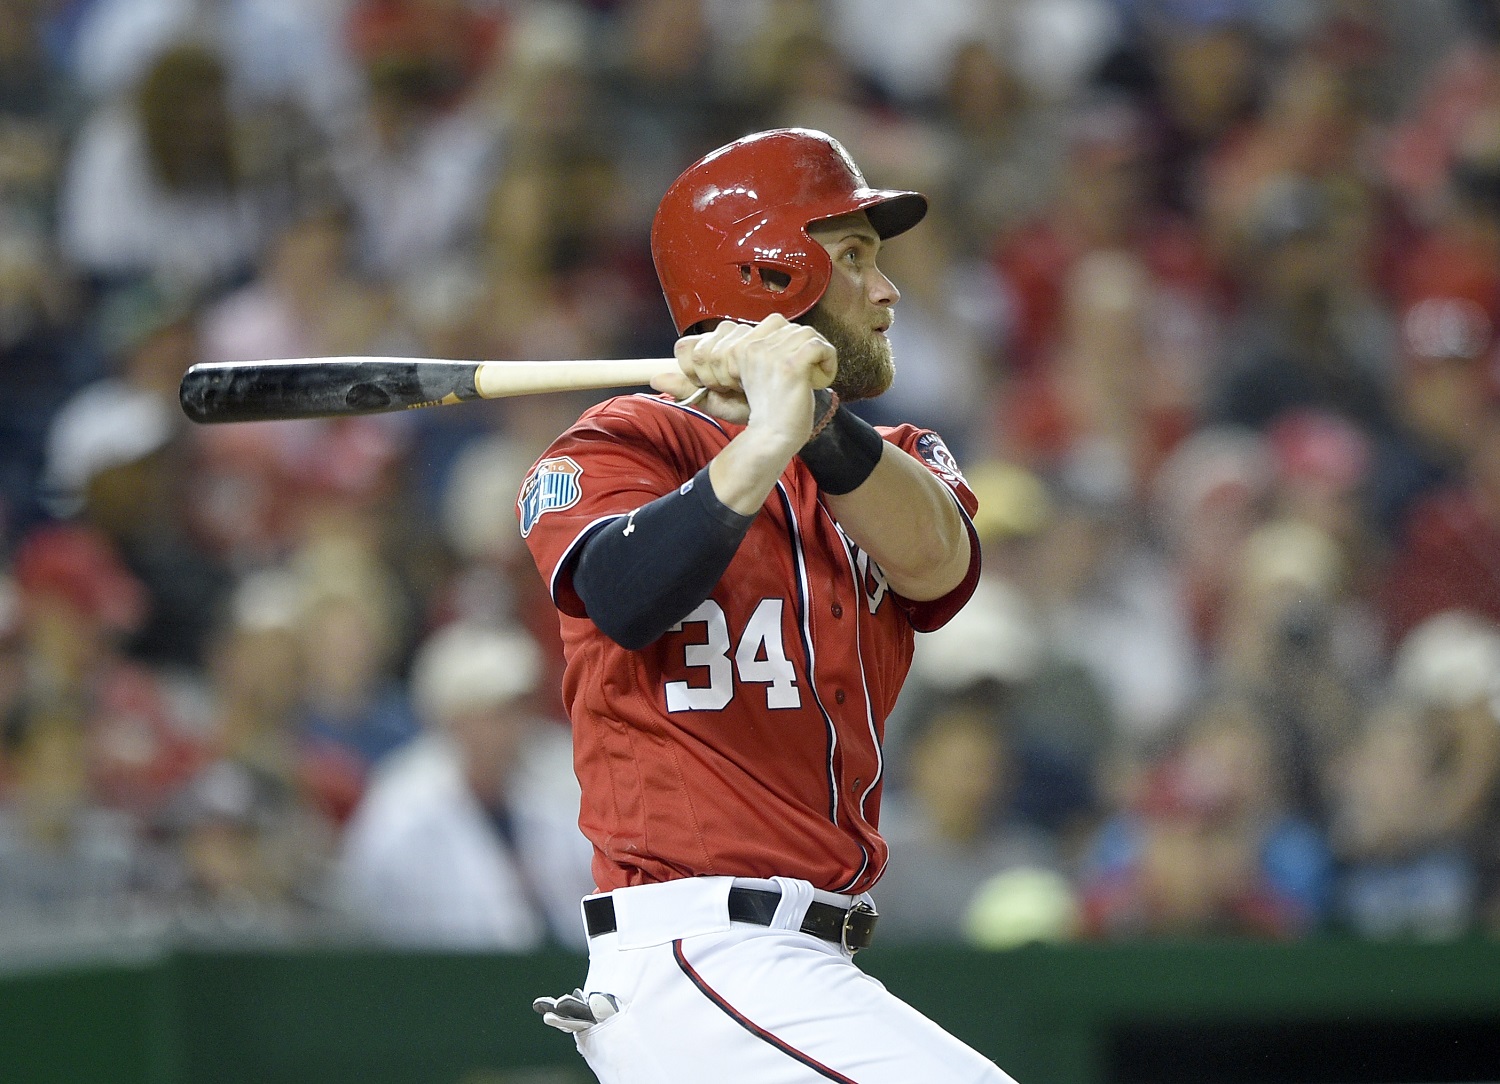 RETRANSMISSION TO CORRECT CITY TO WASHINGTON - Washington Nationals' Bryce Harper doubles during the fifth inning of an interleague exhibition baseball game against the Minnesota Twins, Friday, April 1, 2016, in Washington. The Nationals won 4-3. (AP Photo/Nick Wass)